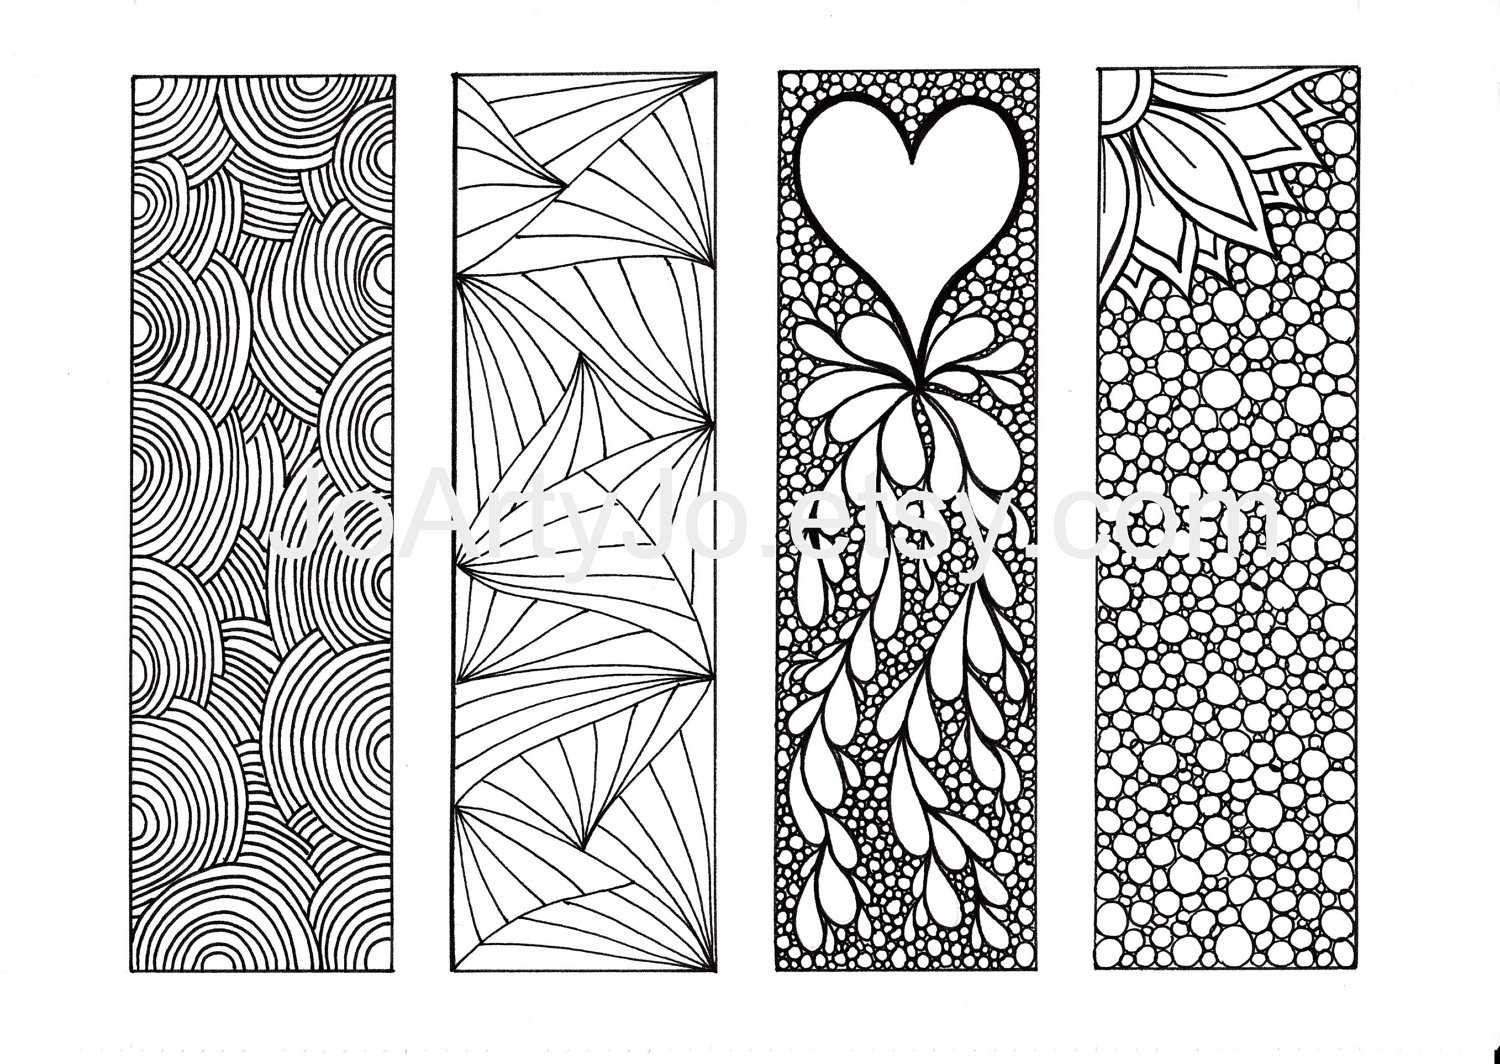 Coloring Pages : Coloring Pages Free Bookmarks To Color For Intended For Free Blank Bookmark Templates To Print